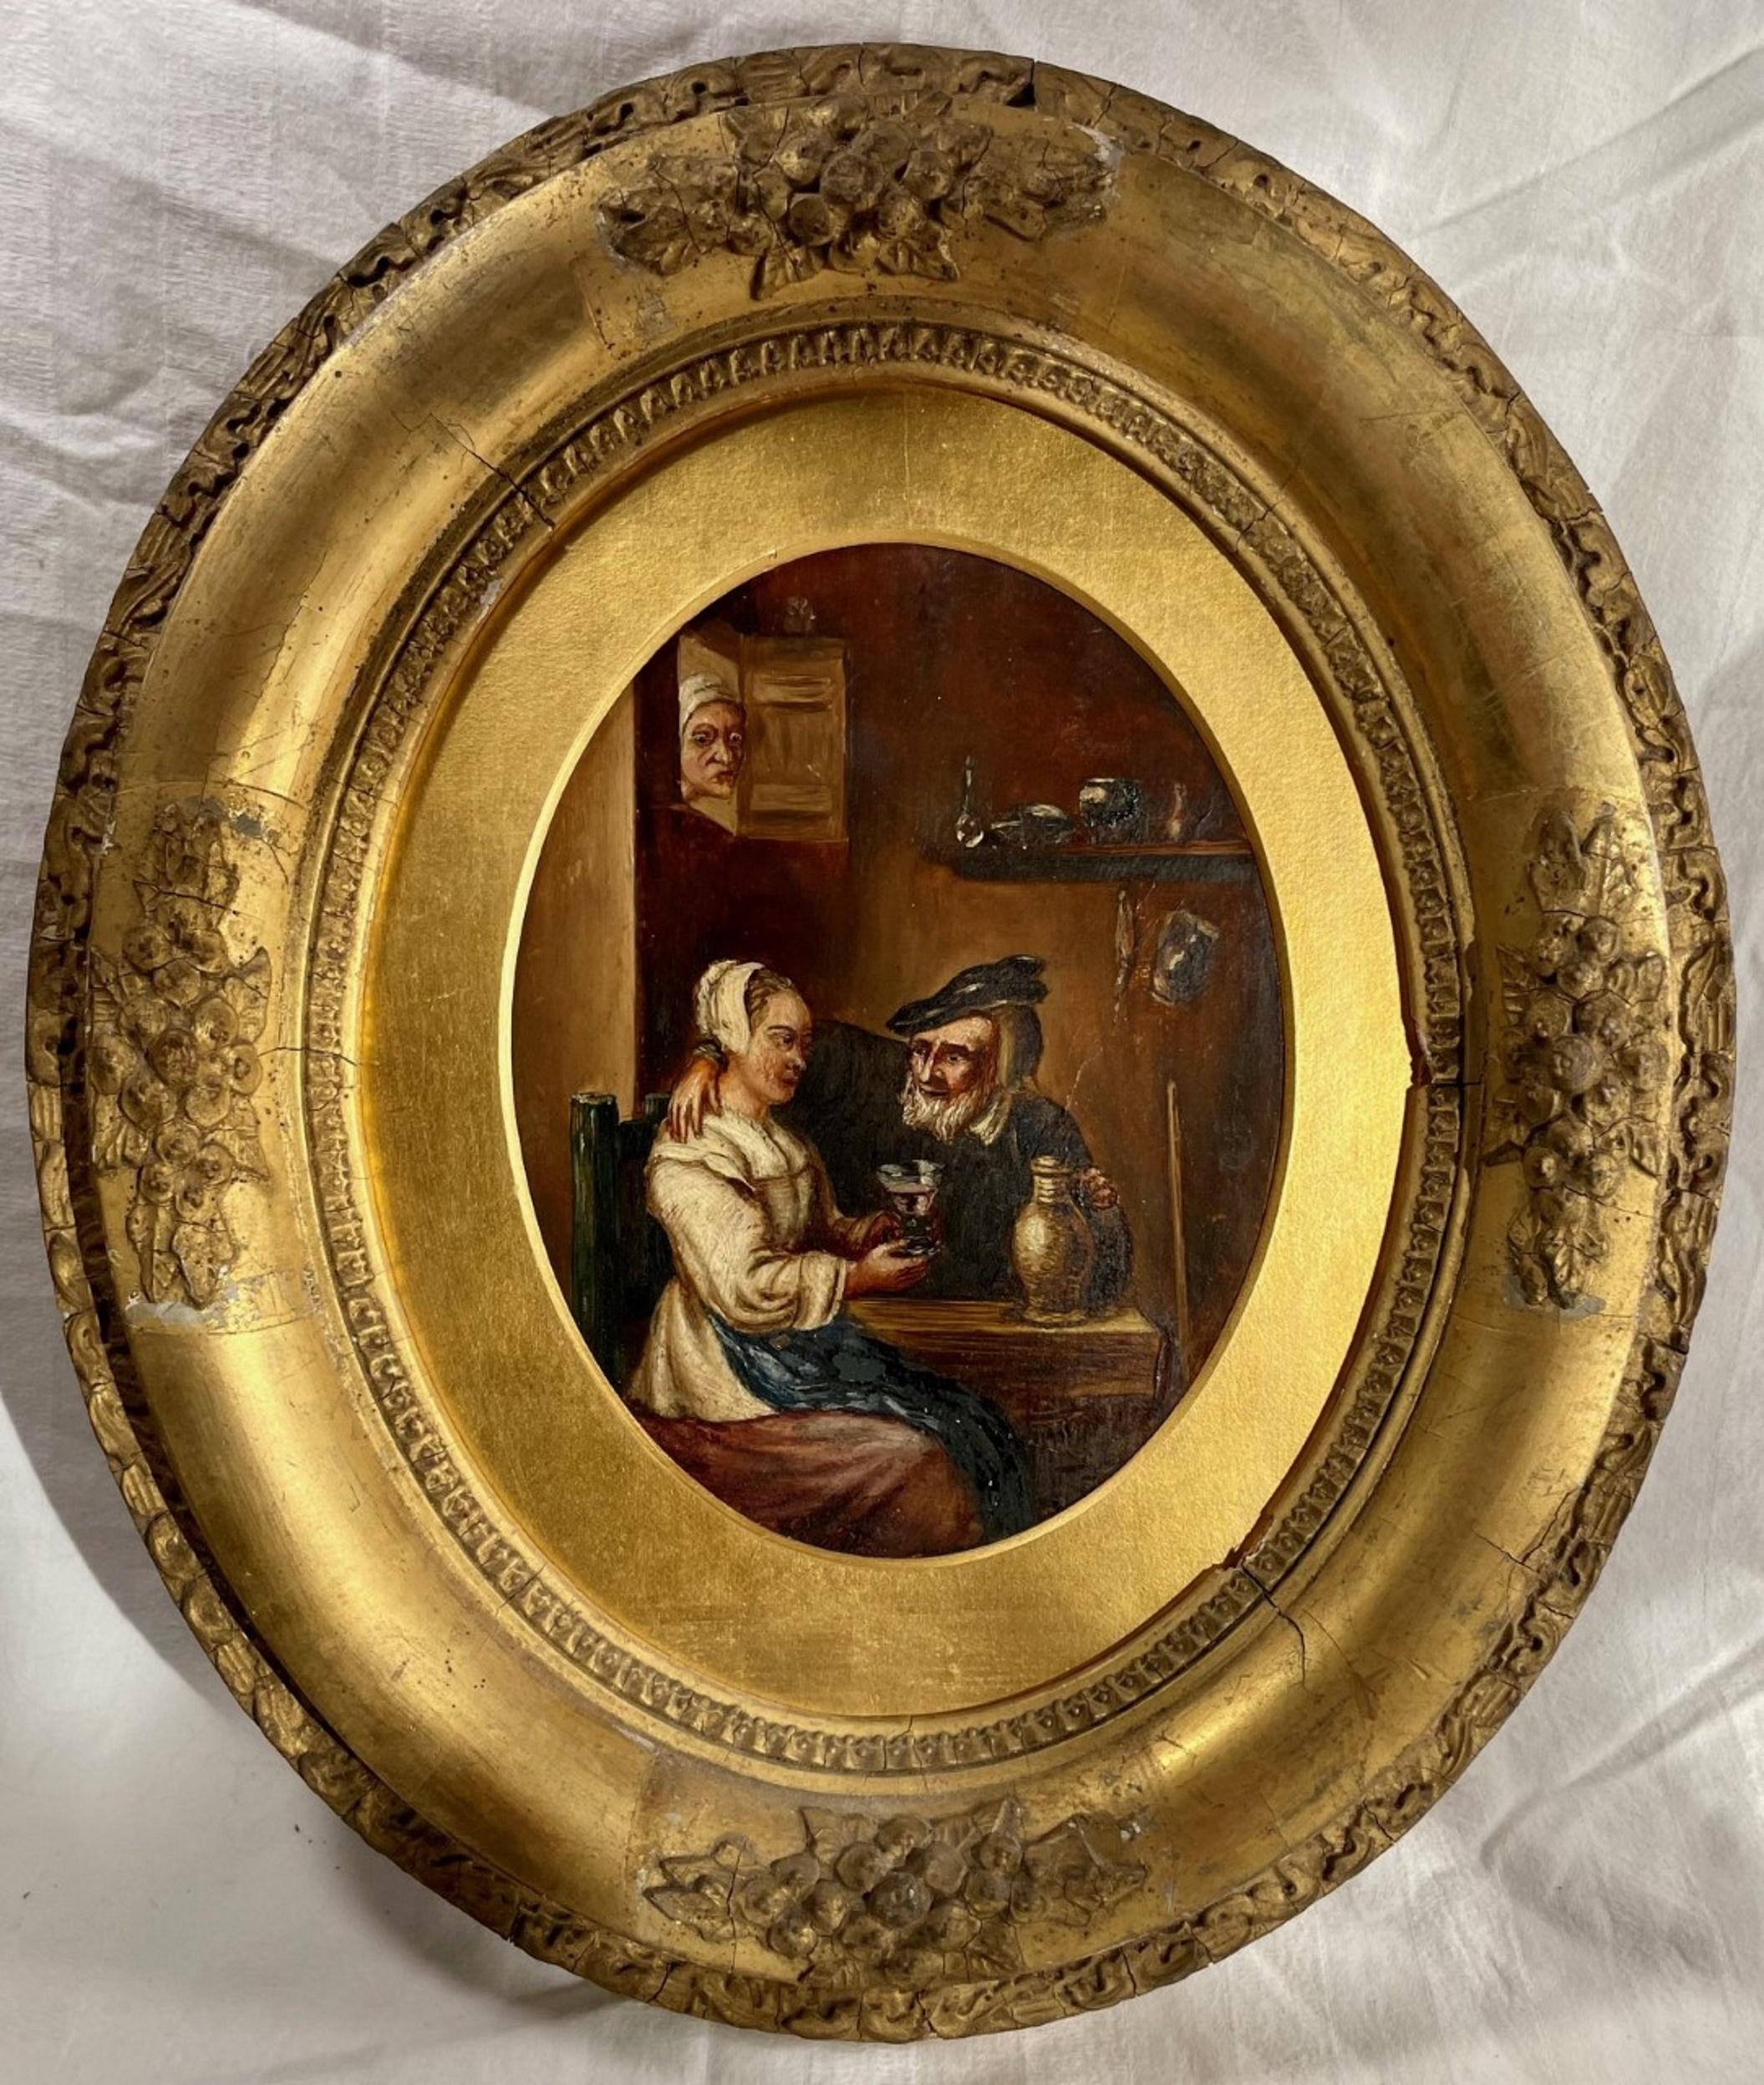 19th Century Dutch oil painting after David Teniers 1610-1690.

Small painting on board after David Teniers. This quality 19th century Dutch painting is well executed in oil. It pictures a domestic genre scene typified in the Dutch work of the